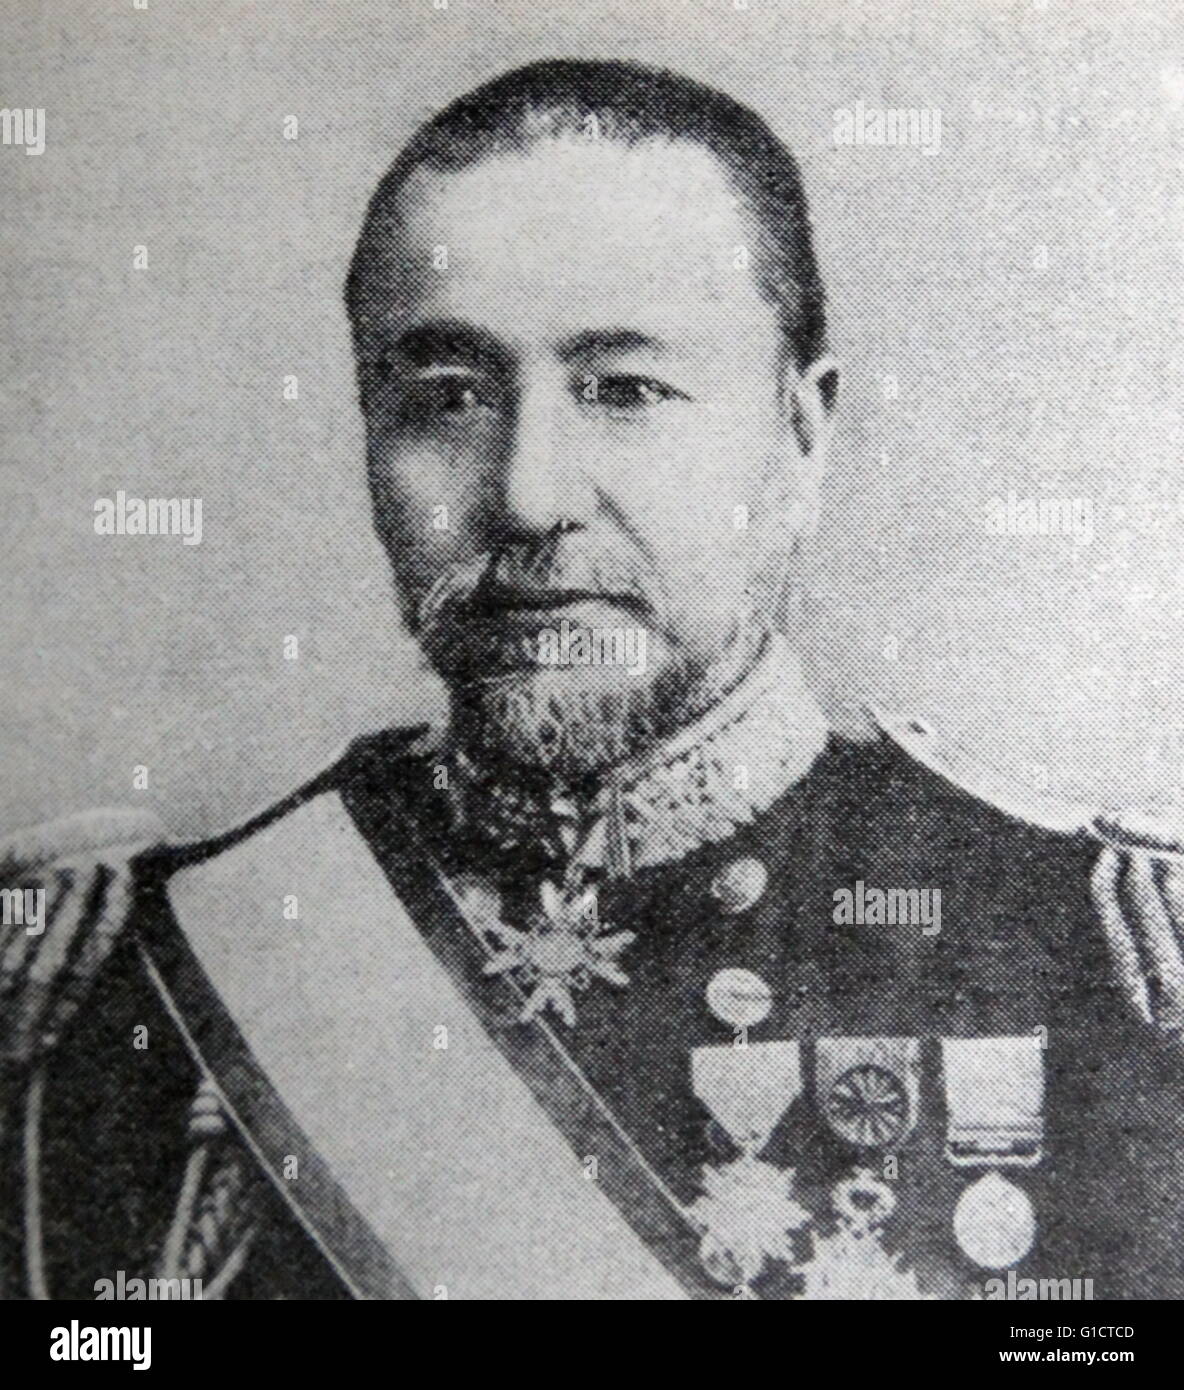 Photographic portrait of Admiral Count T?g? Heihachir? (1848-1934) a Gensui or admiral of the fleet in the Imperial Japanese Navy and one of Japan's greatest naval heroes. Dated 19th Century Stock Photo